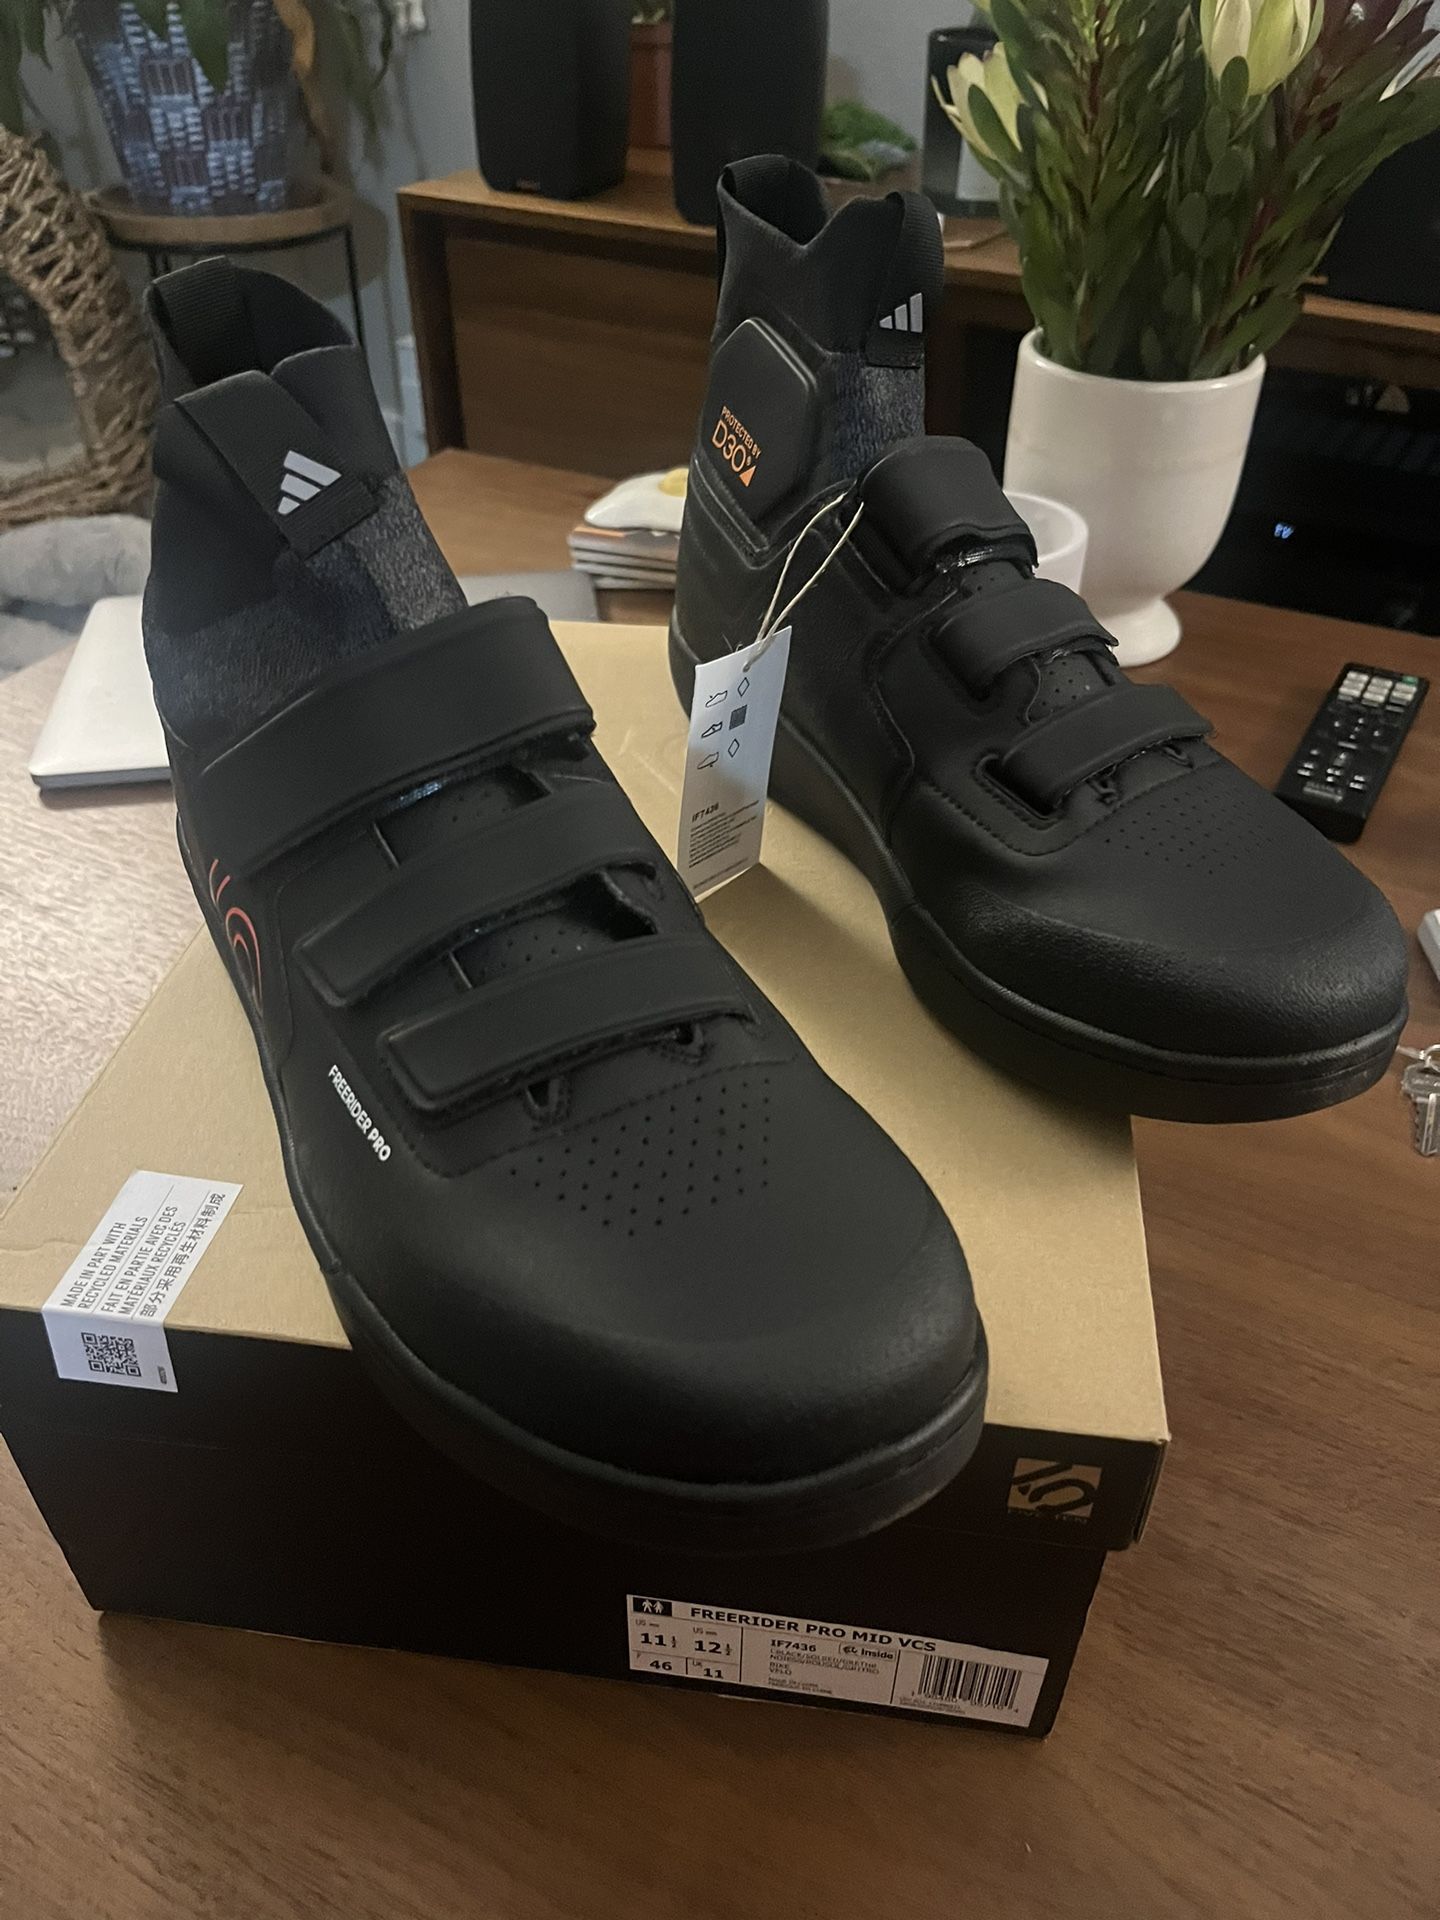 Brand New Adidas Freerider Pro Mid VCS Bicycle Shoes Never Worn Box Included Sneakers 11 1/2 Mens Us Women’s 12 1/2 F 46 UK 11